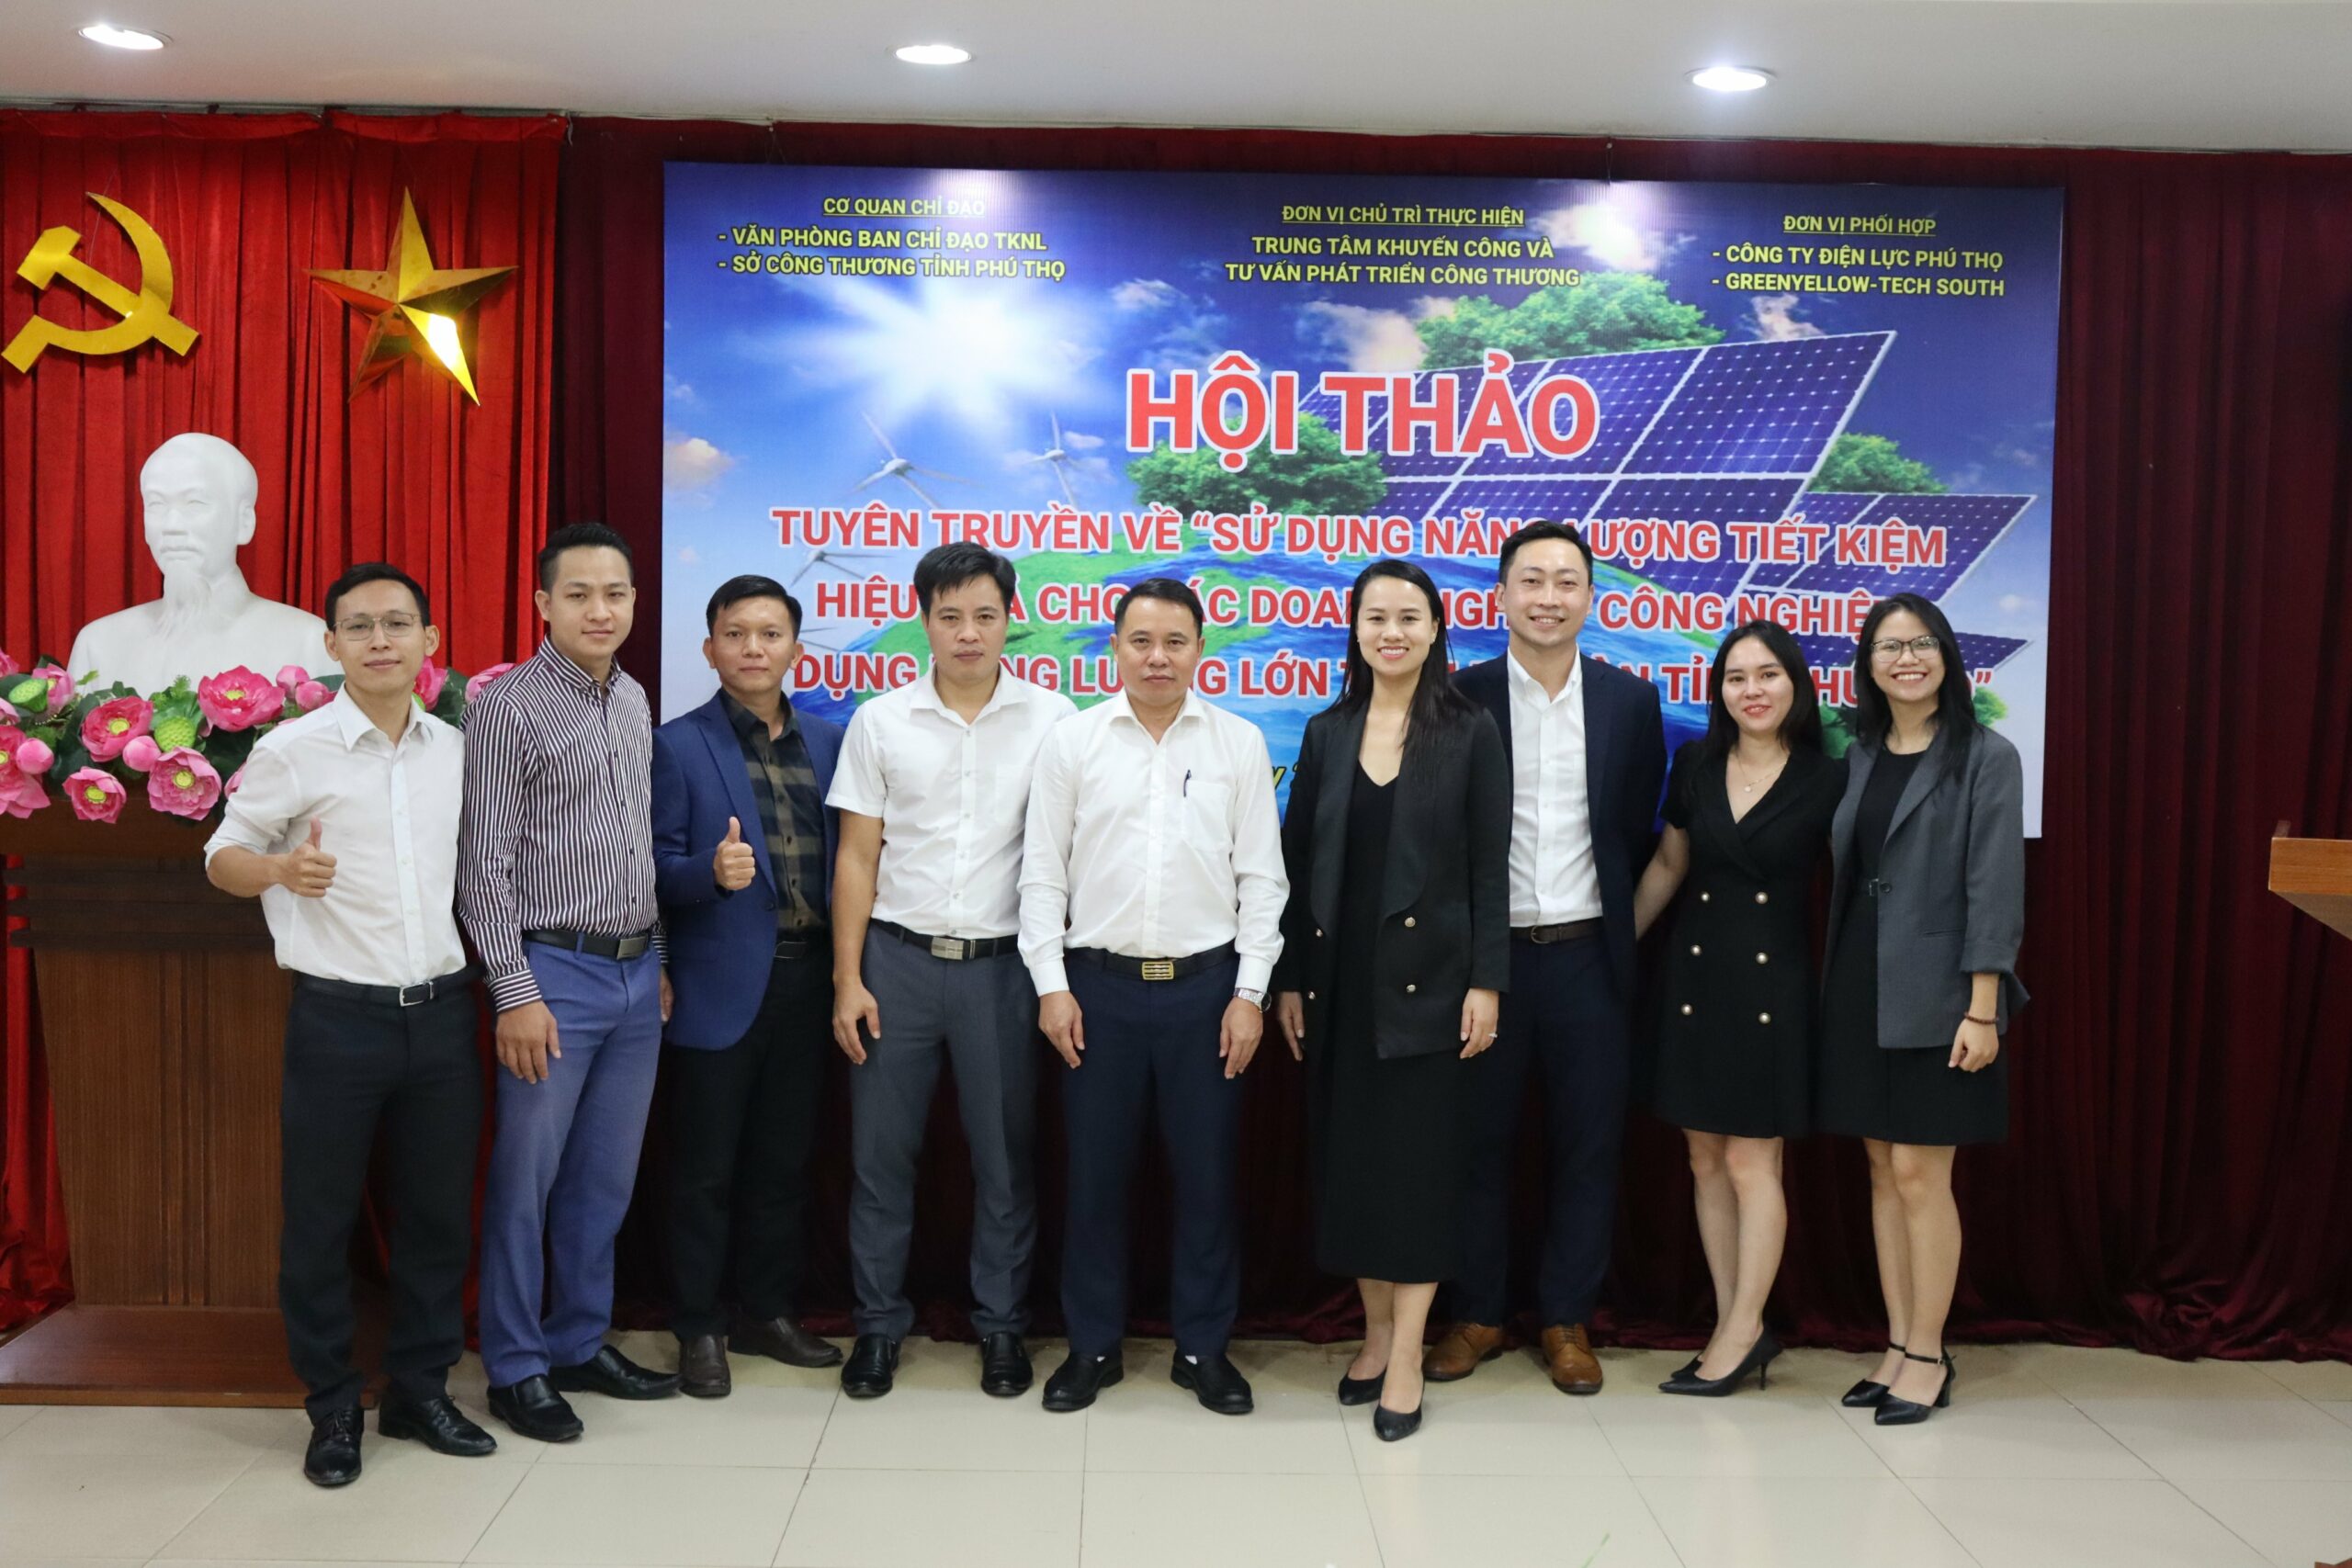 Workshop on Economical & Efficient Use of Energy - Phu Tho Department of Industry and Trade